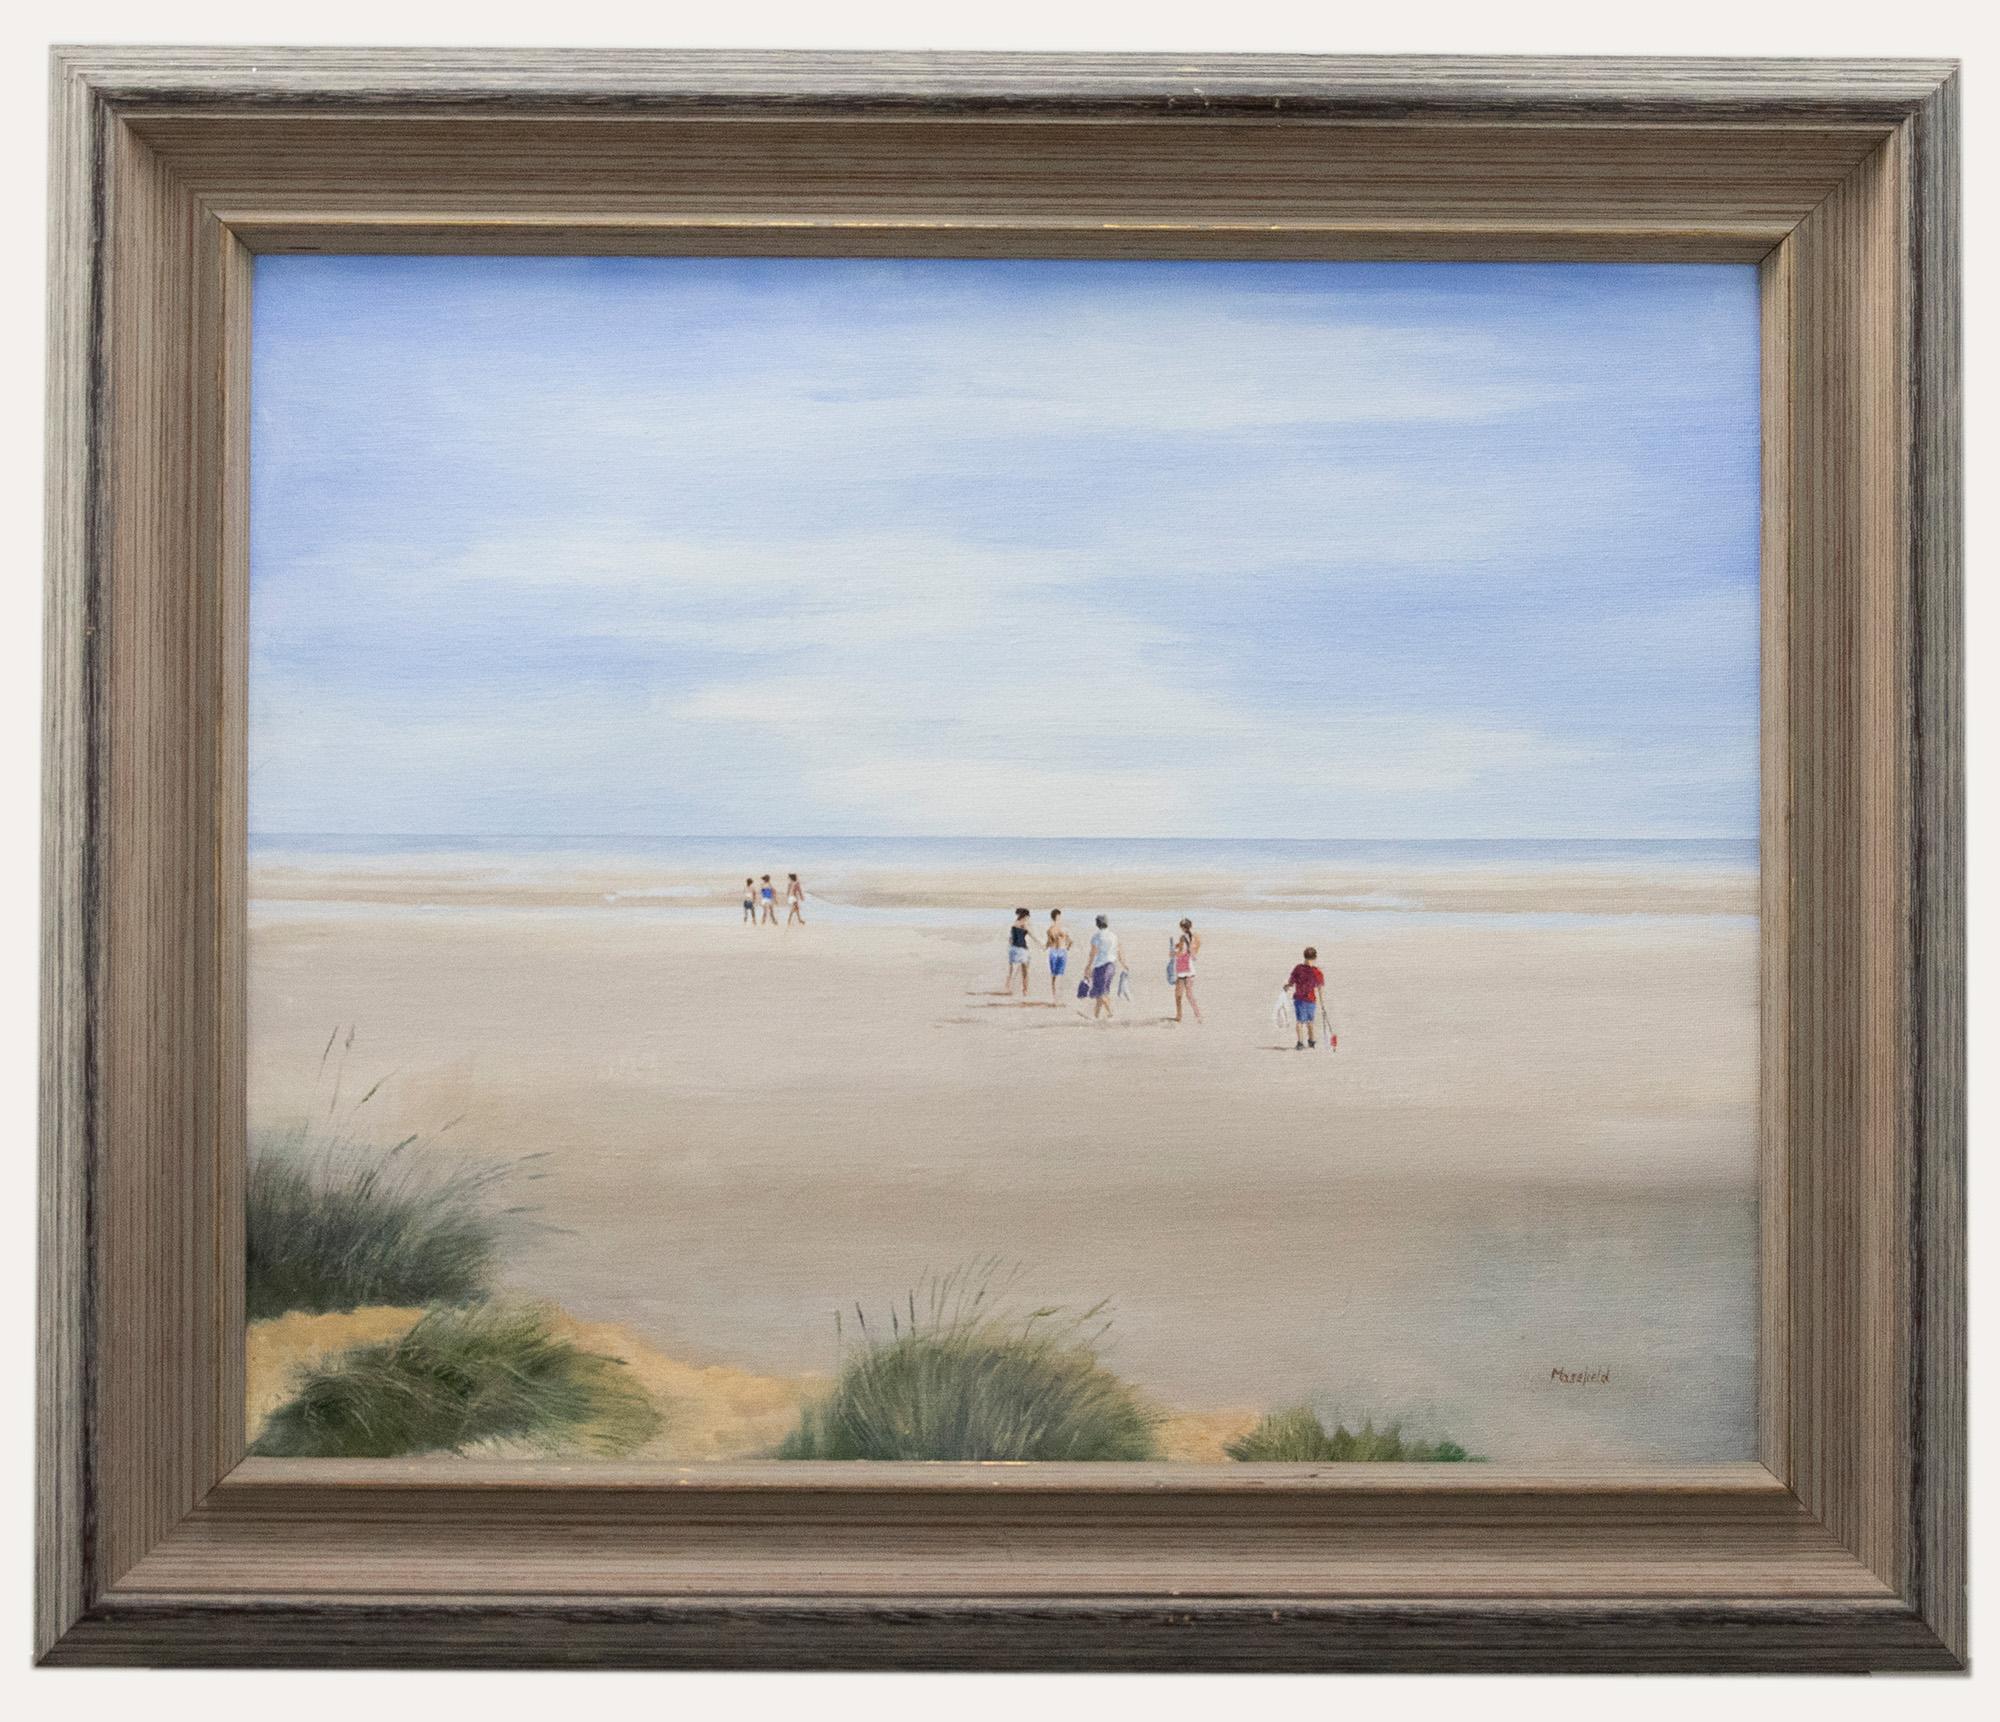 Unknown Figurative Painting - Eric Masefield - Framed Contemporary Oil, Dunes at Camber